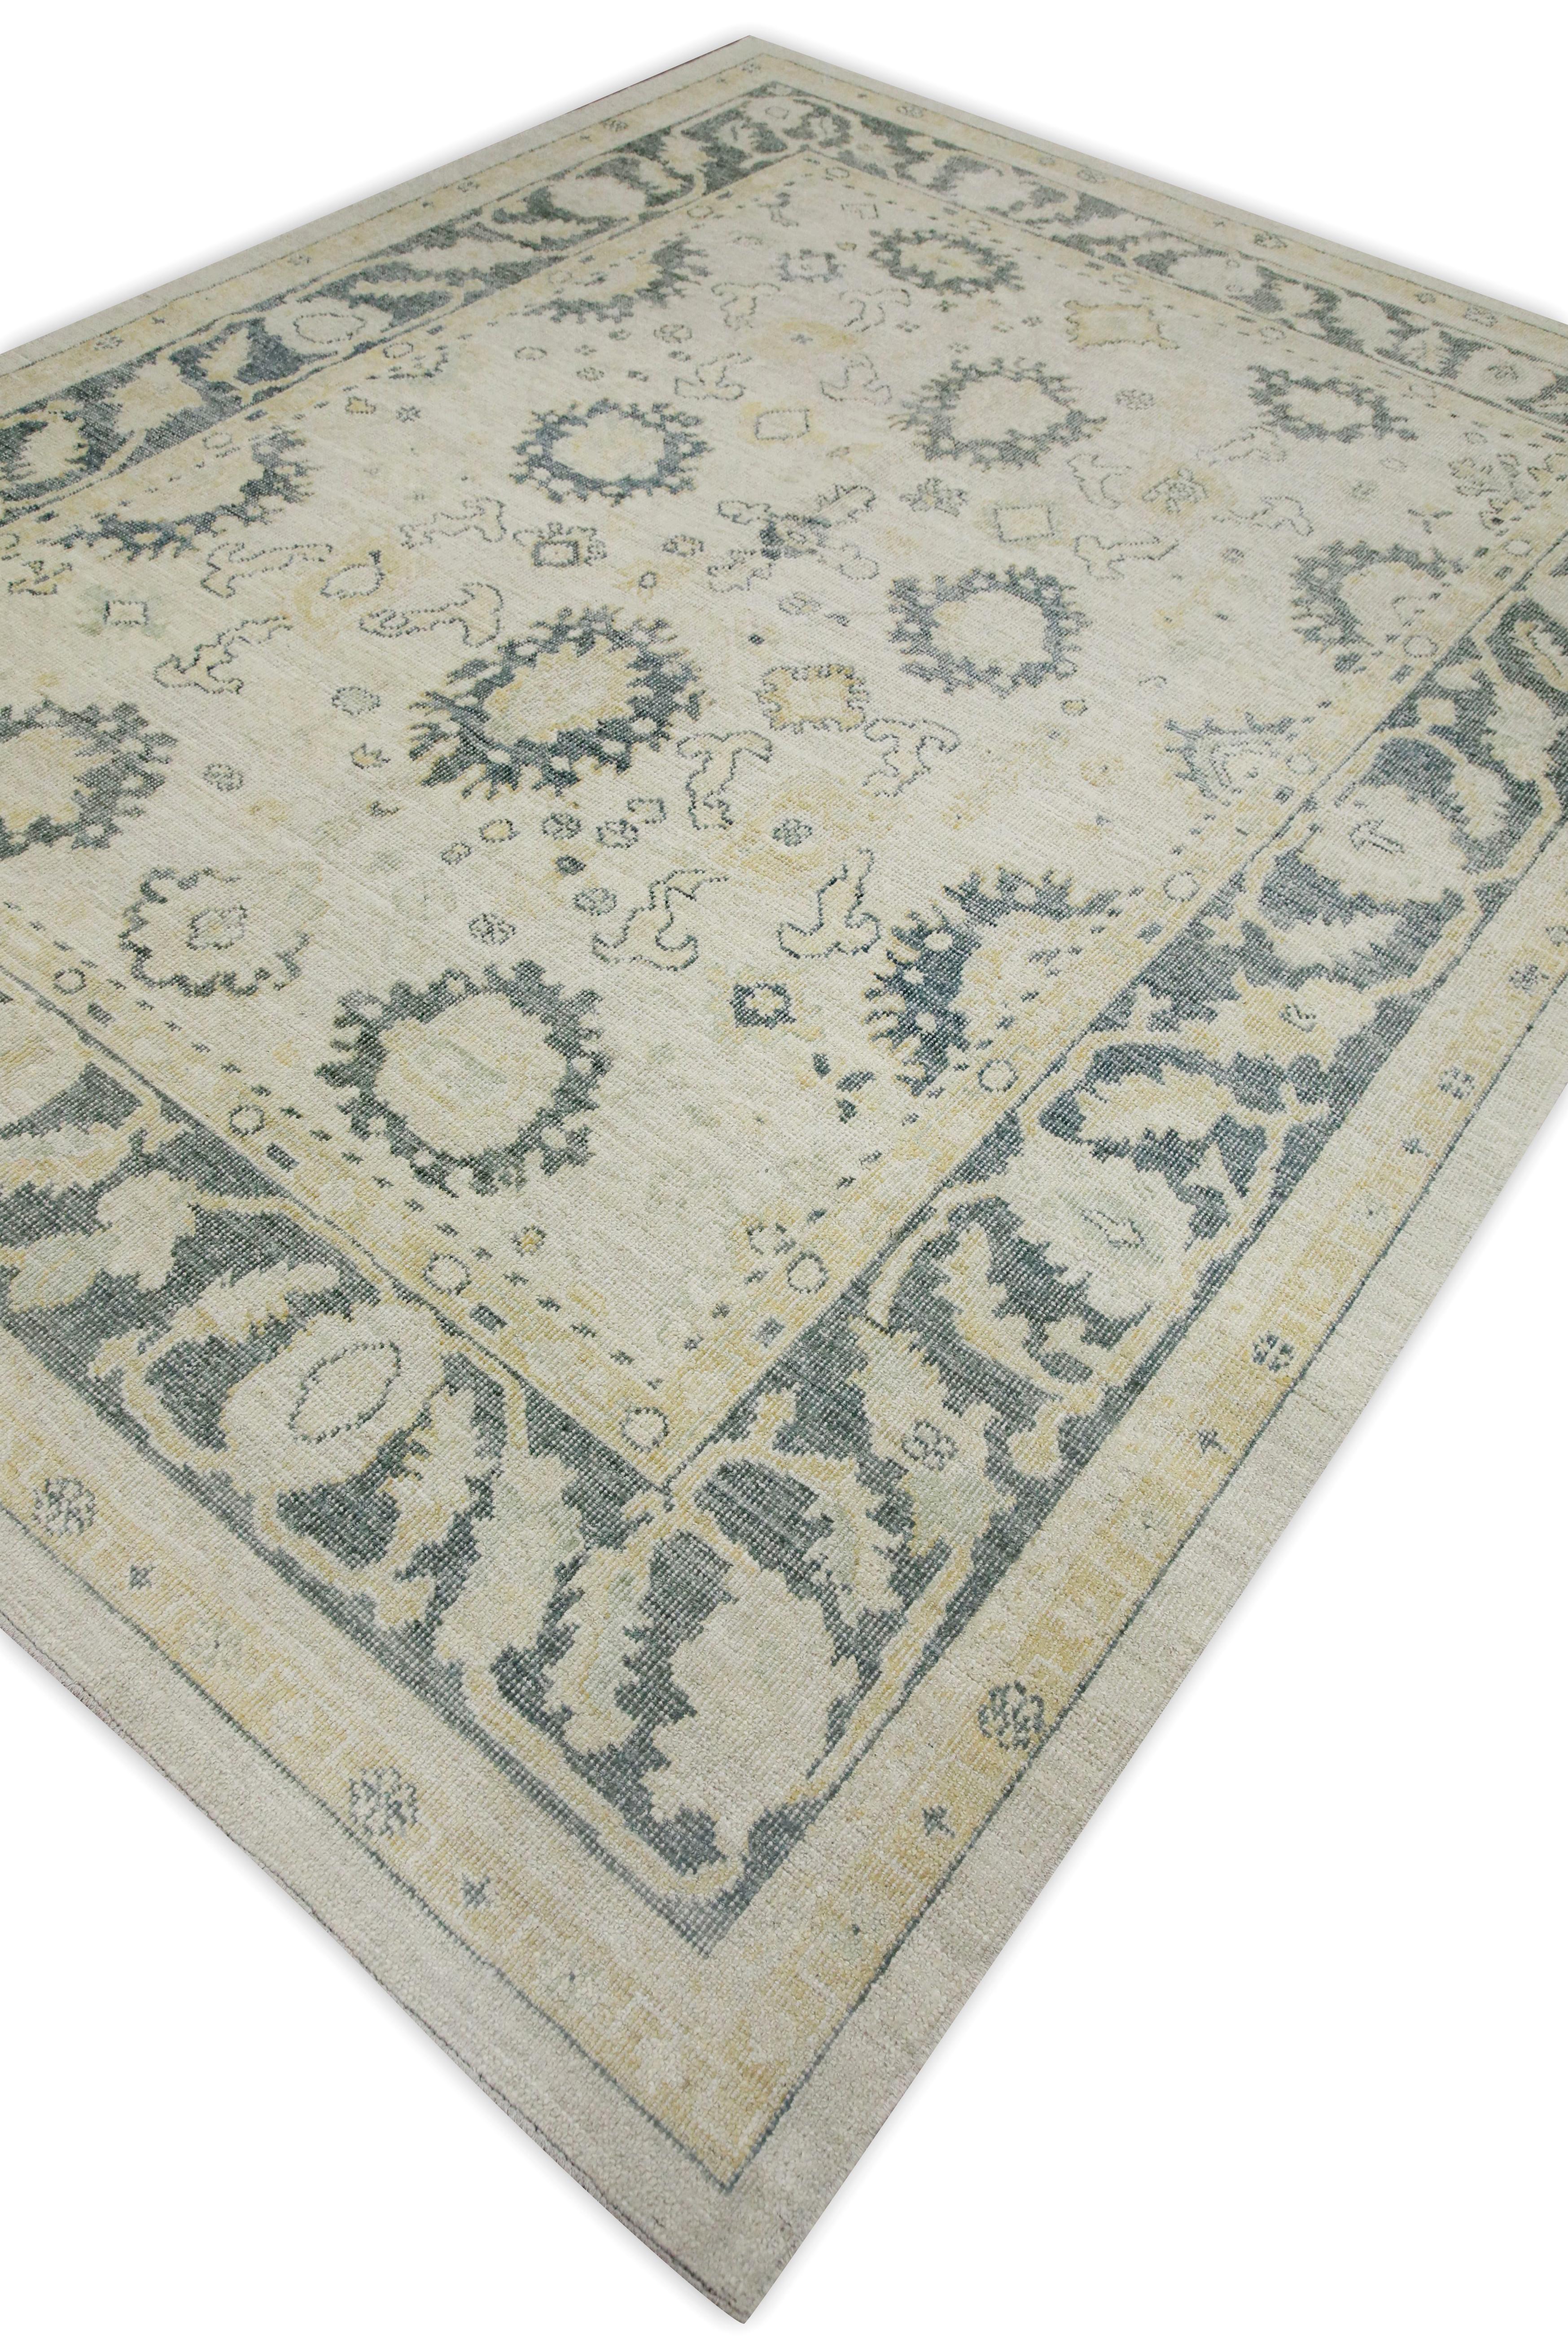 Contemporary White & Green Floral Design Handwoven Wool Turkish Oushak Rug 7'9